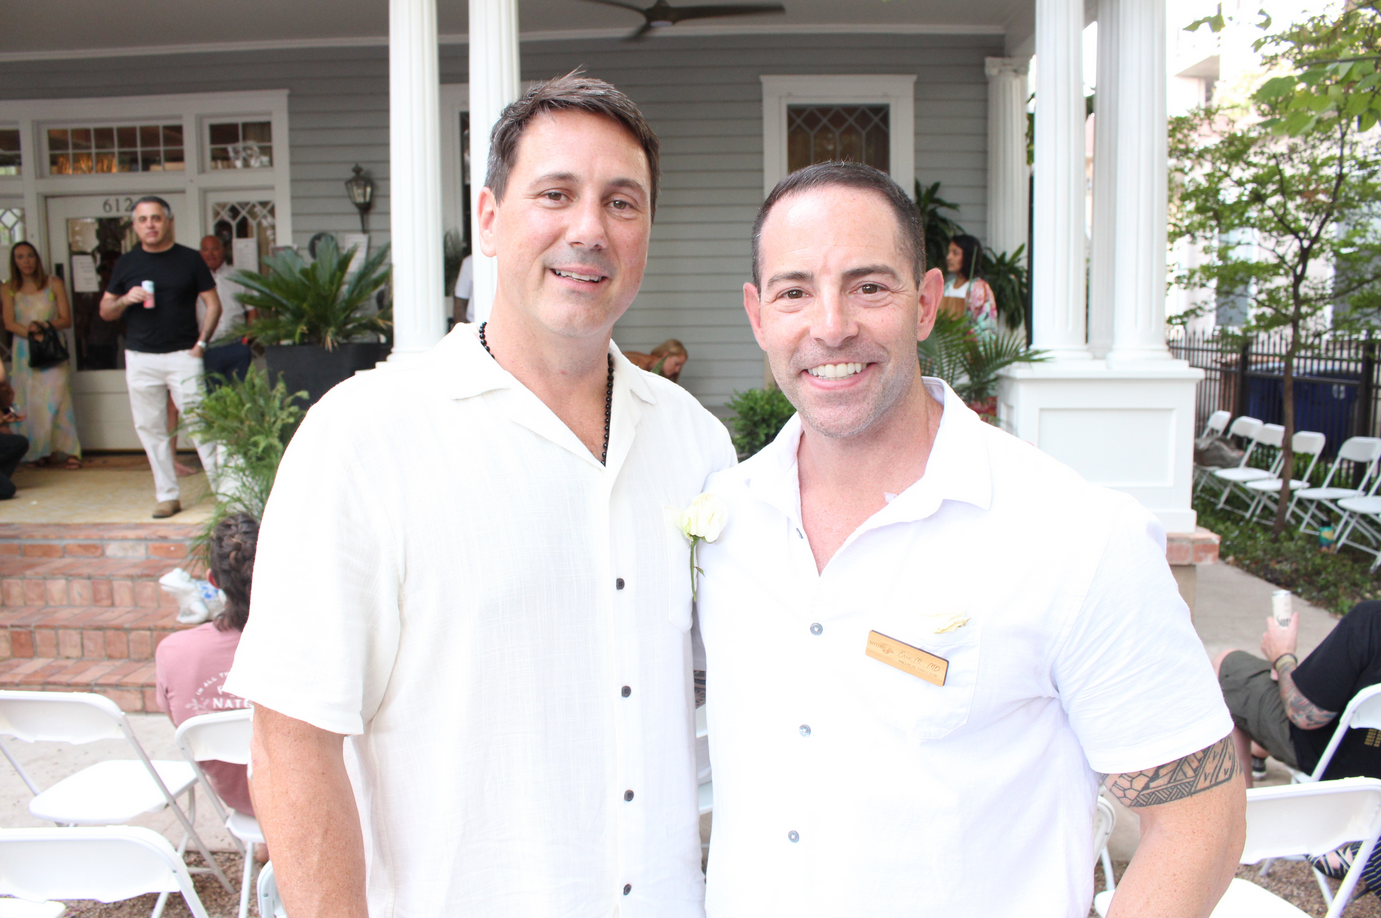 David Naylor, CEO of WITHIN (L) and Eric Miller, MD, Medical Director of WITHIN (R)